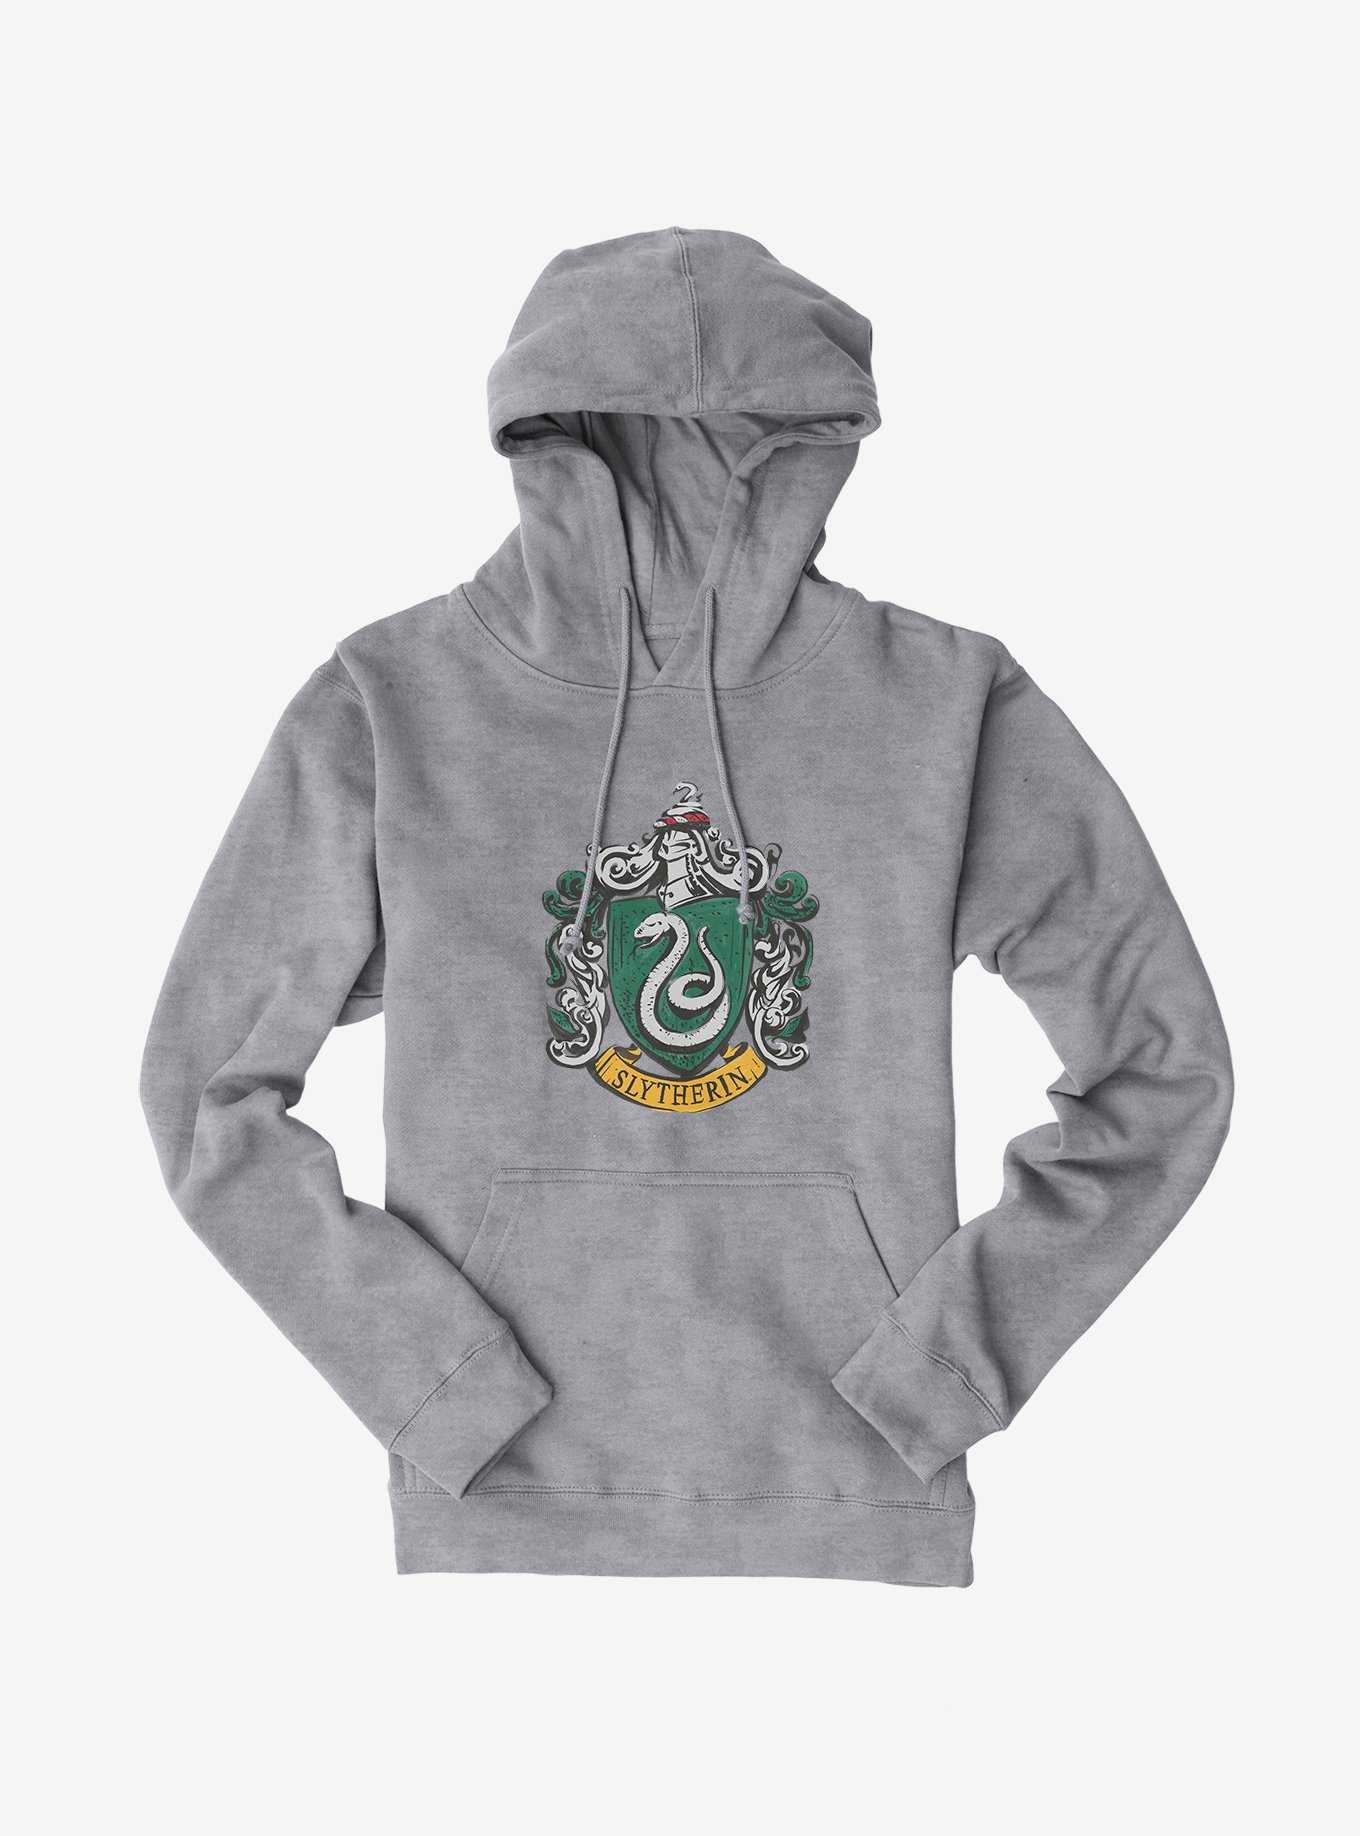 OFFICIAL Harry Potter Hoodies & | Topic Hot Sweaters